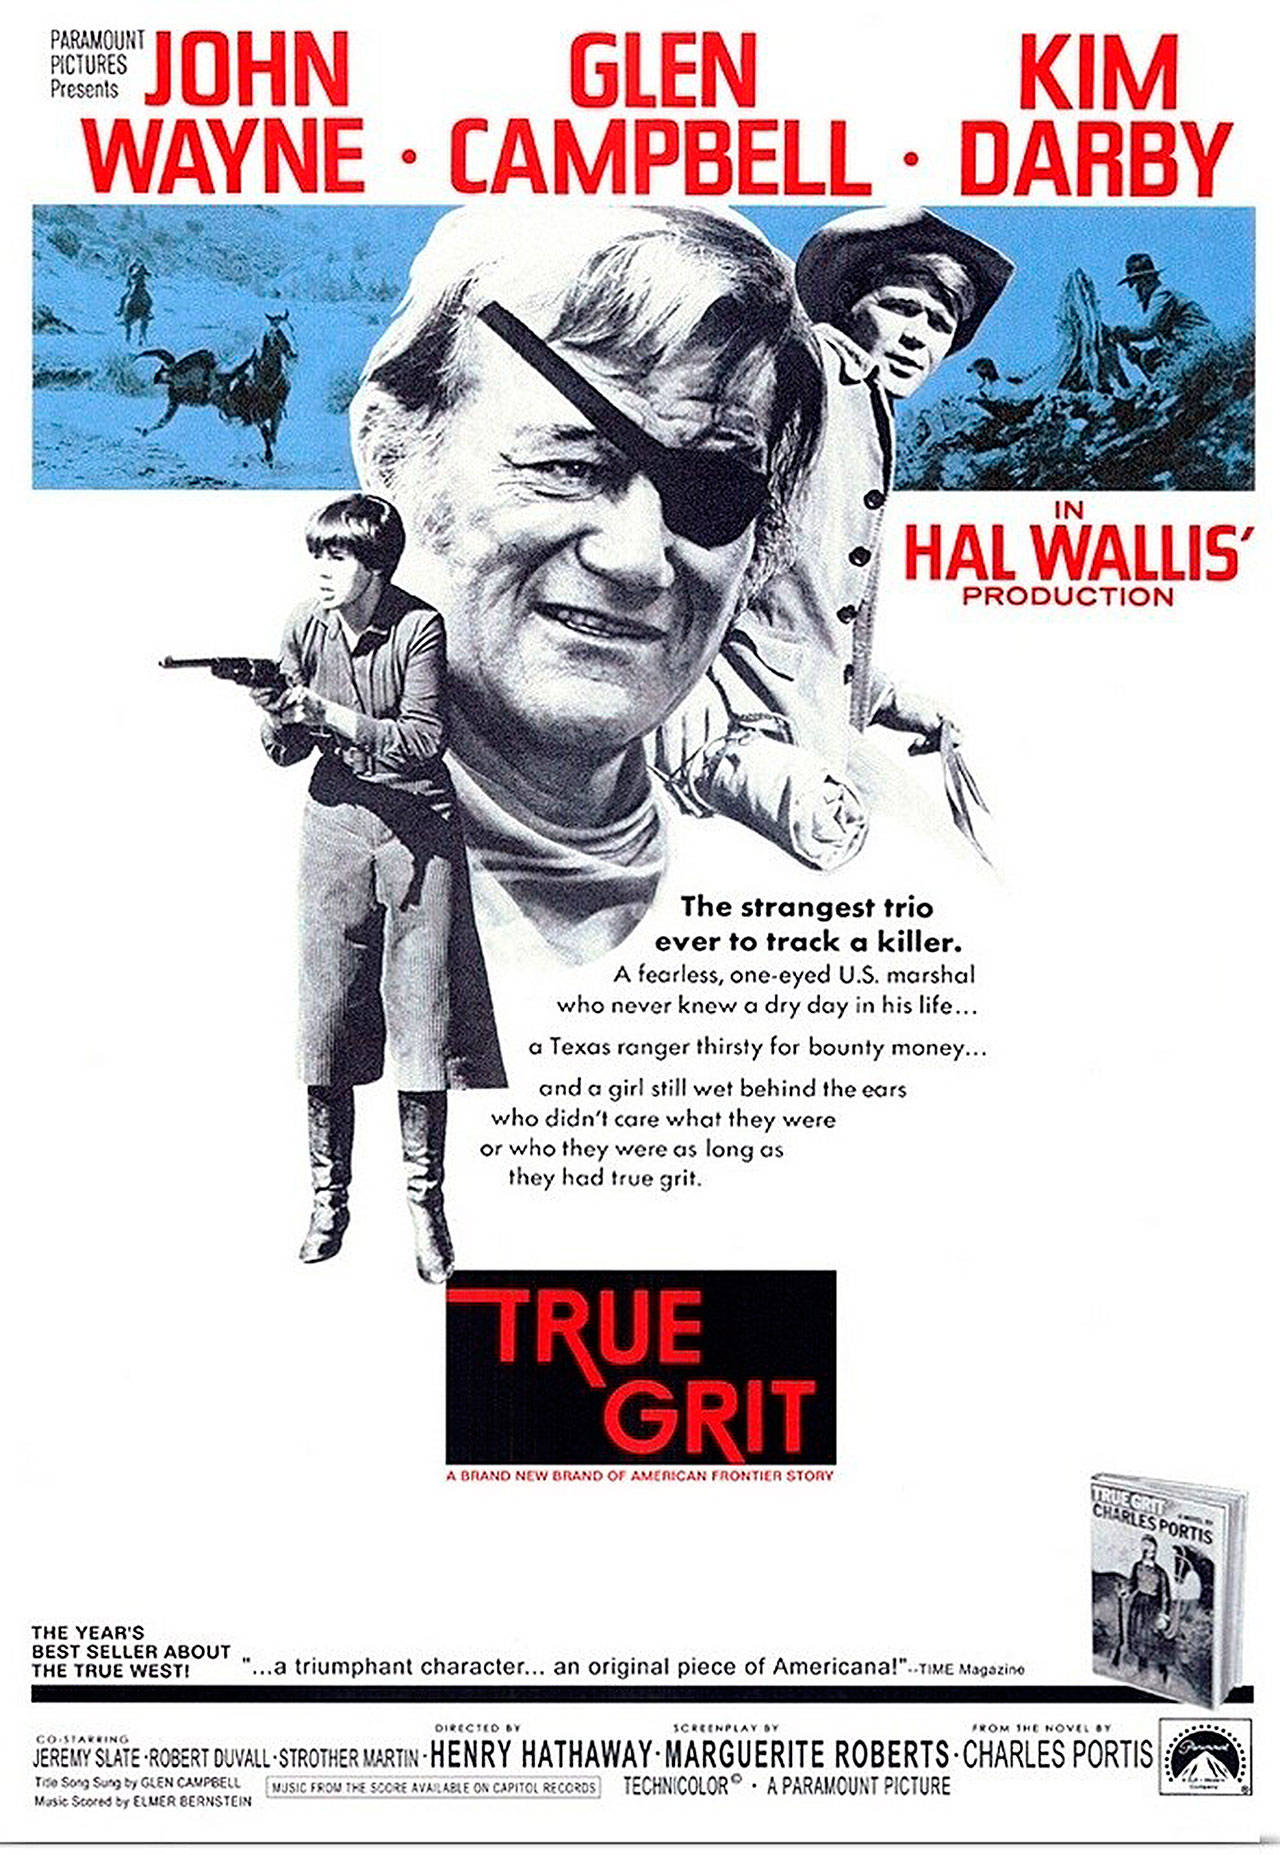 Image courtesy of Paramount Pictures | The 1969 western classic “True Grit,” starring Kim Darby and John Wayne will play at Bainbridge Cinemas as part of a special anniversary revival at 7 p.m. Wednesday, May 8.